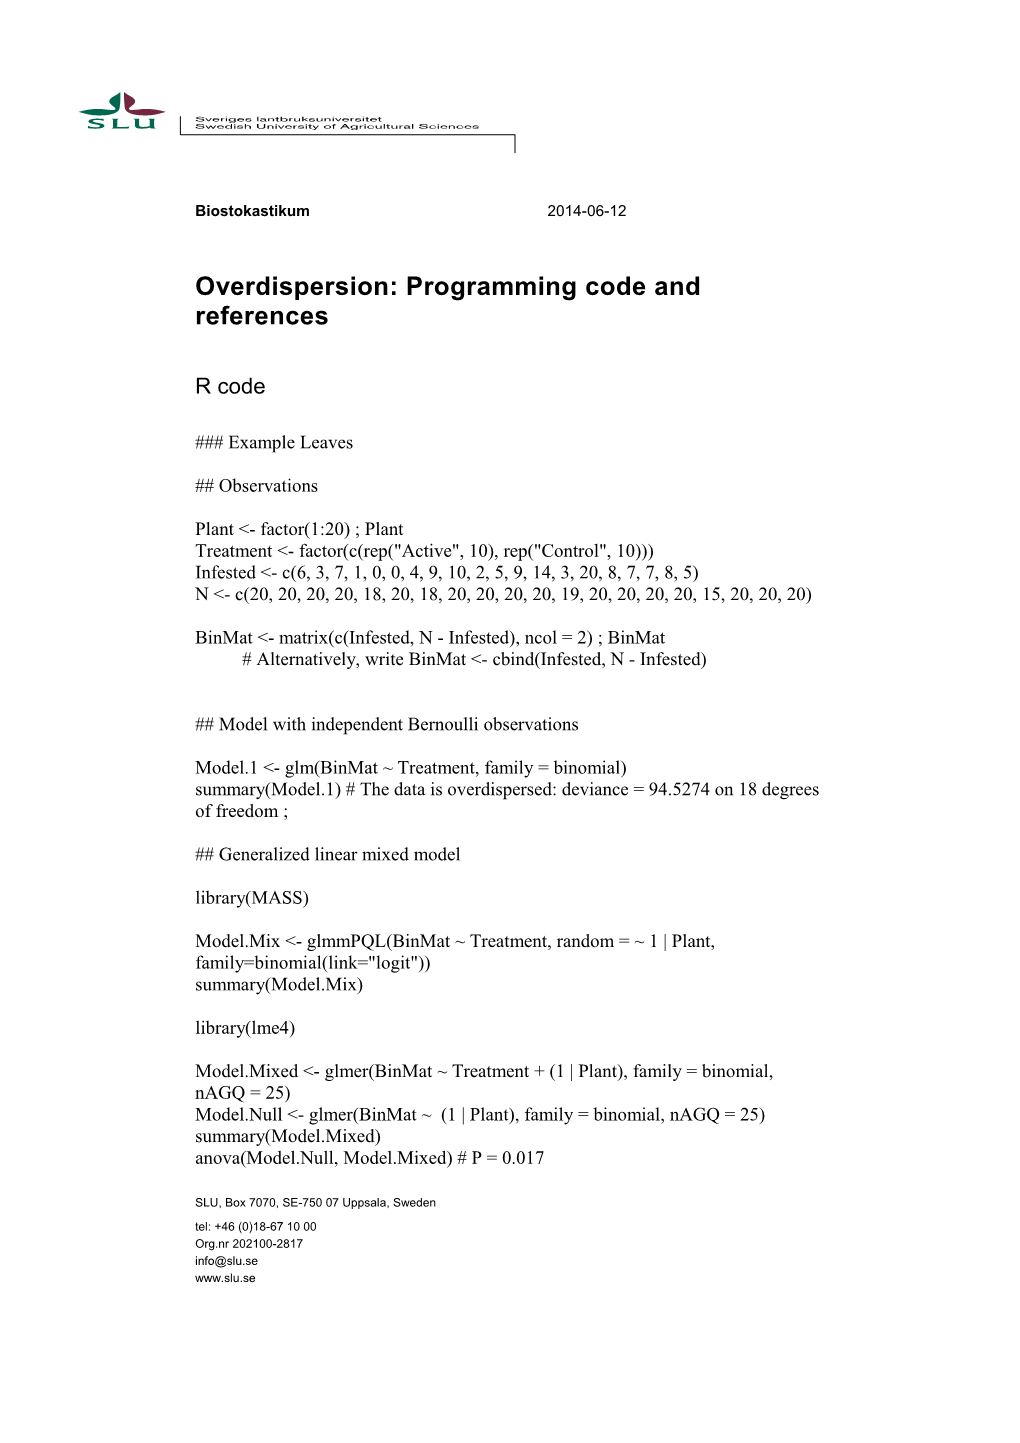 Overdispersion: Programming Code and References